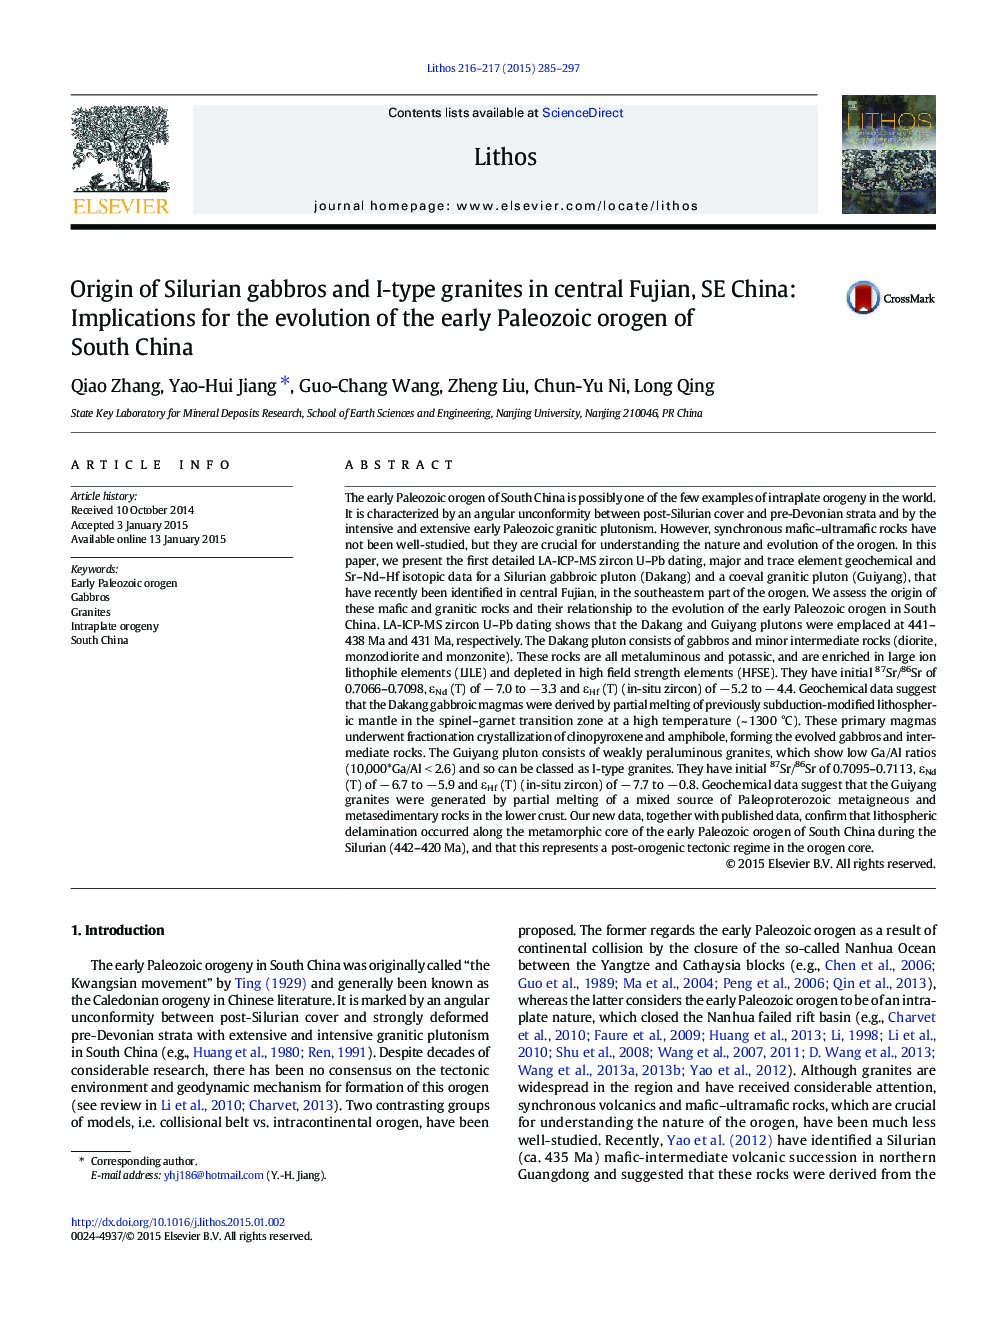 Origin of Silurian gabbros and I-type granites in central Fujian, SE China: Implications for the evolution of the early Paleozoic orogen of South China